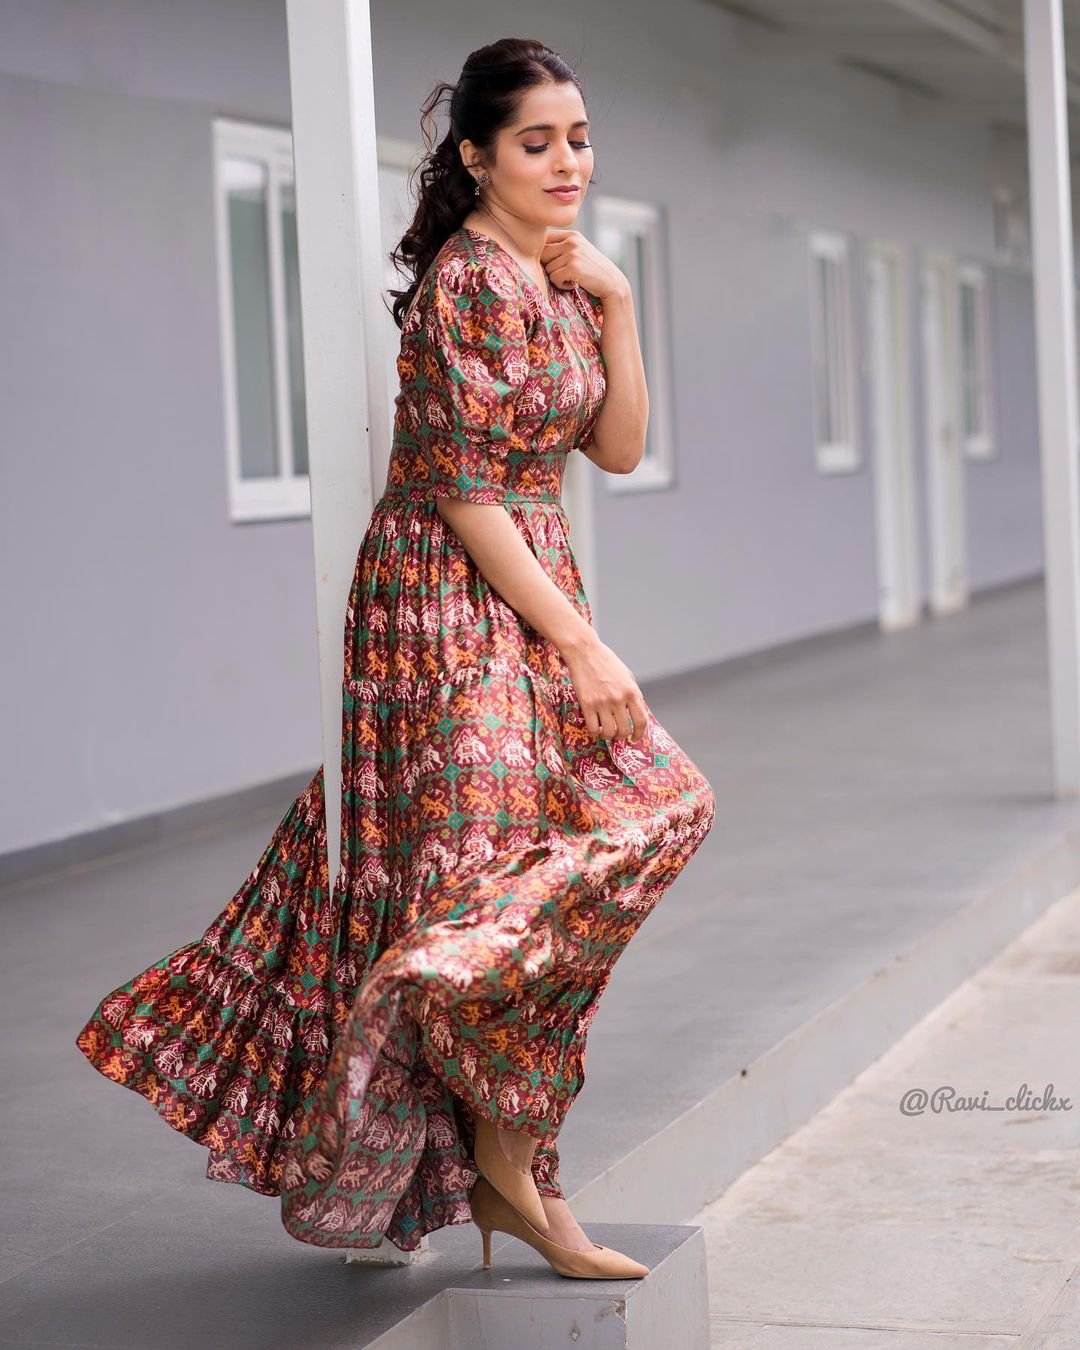 Anchor rashmi gautam ups her fashion style in this poses-Rashmigautam, Anchorrashmi, Rashmi Gautam Photos,Spicy Hot Pics,Images,High Resolution WallPapers Download